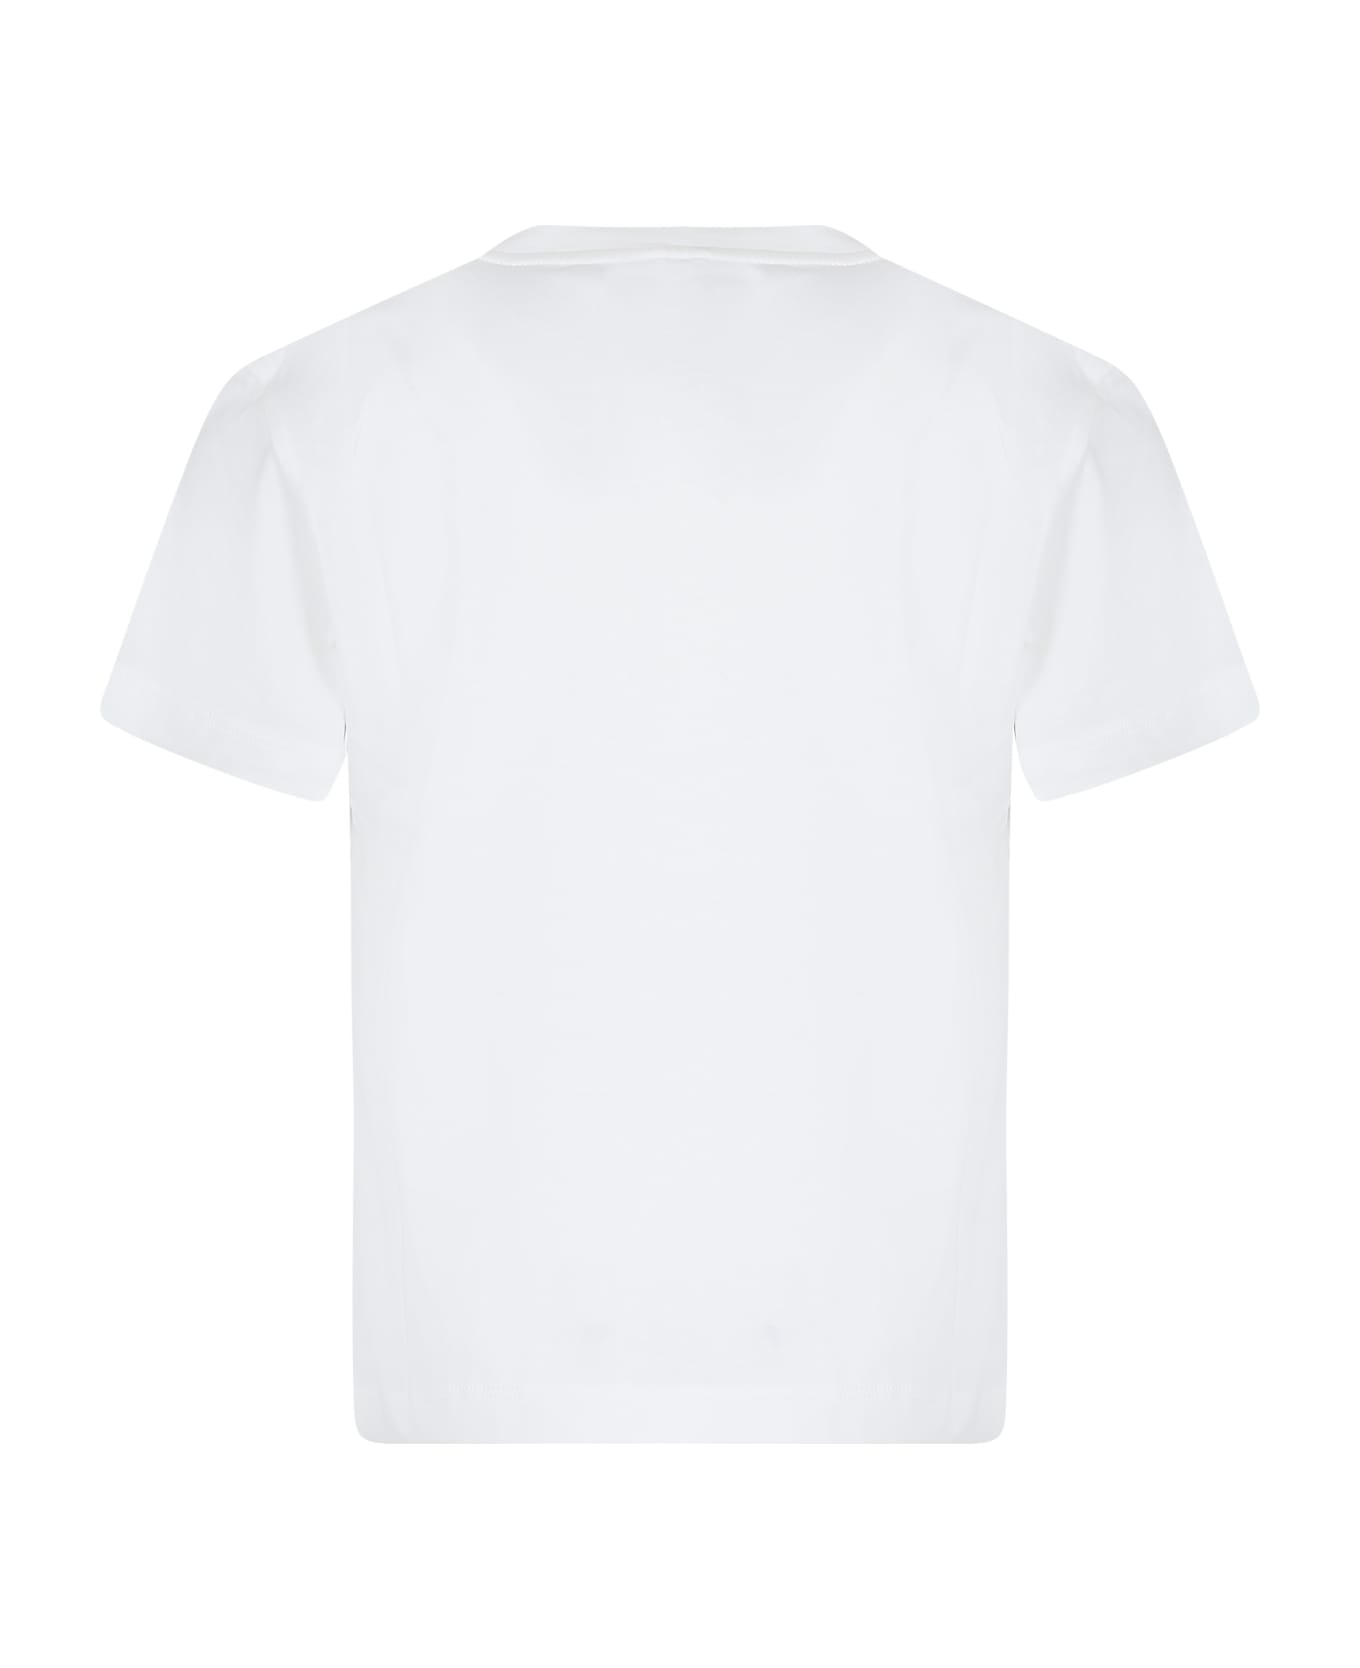 Stella McCartney Kids Ivory T-shirt For Boy With Glasses Print - Ivory Tシャツ＆ポロシャツ